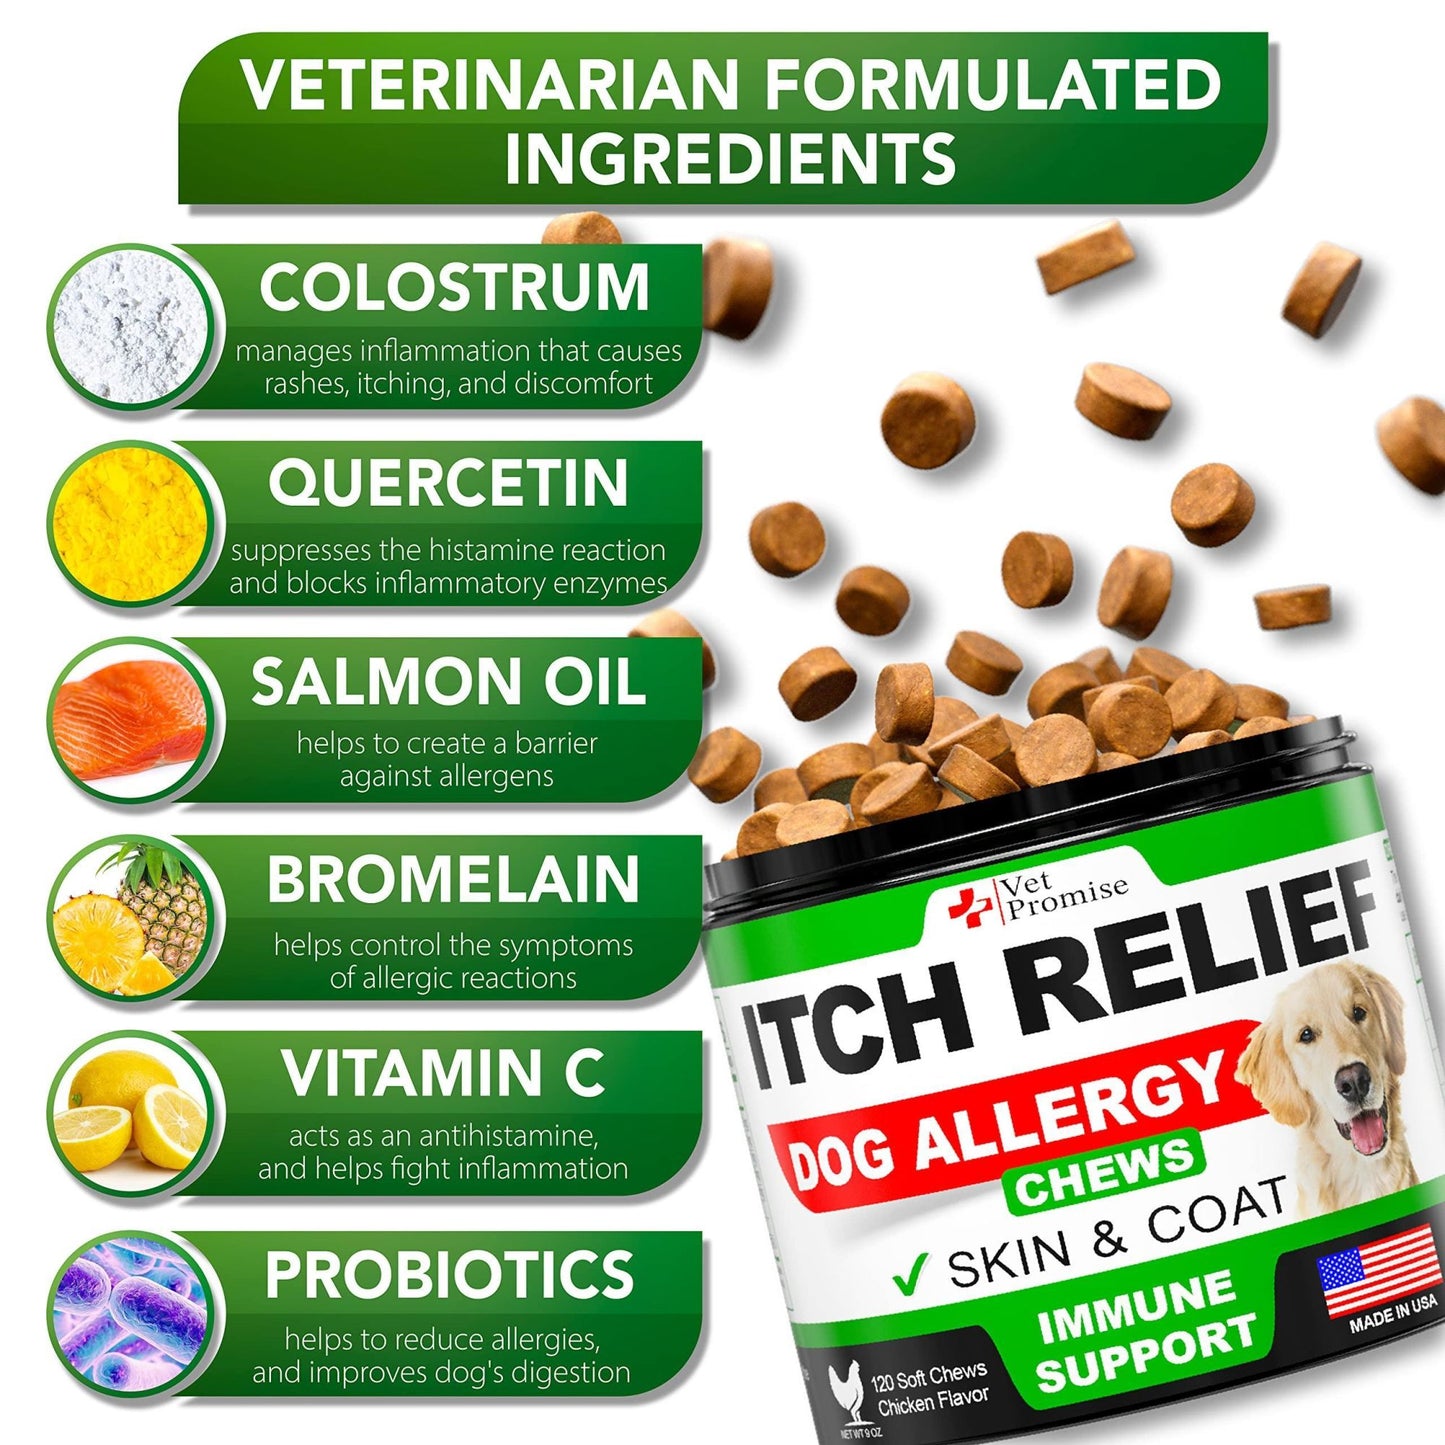 Dog Allergy Chews   Itch Relief for Dogs   Dog Allergy Relief   Anti Itch for Dogs   Dog Itchy Skin Treatment   Dog Allergy Support   Hot Spots   Immune Health Supplement   Made in USA   120 Treats